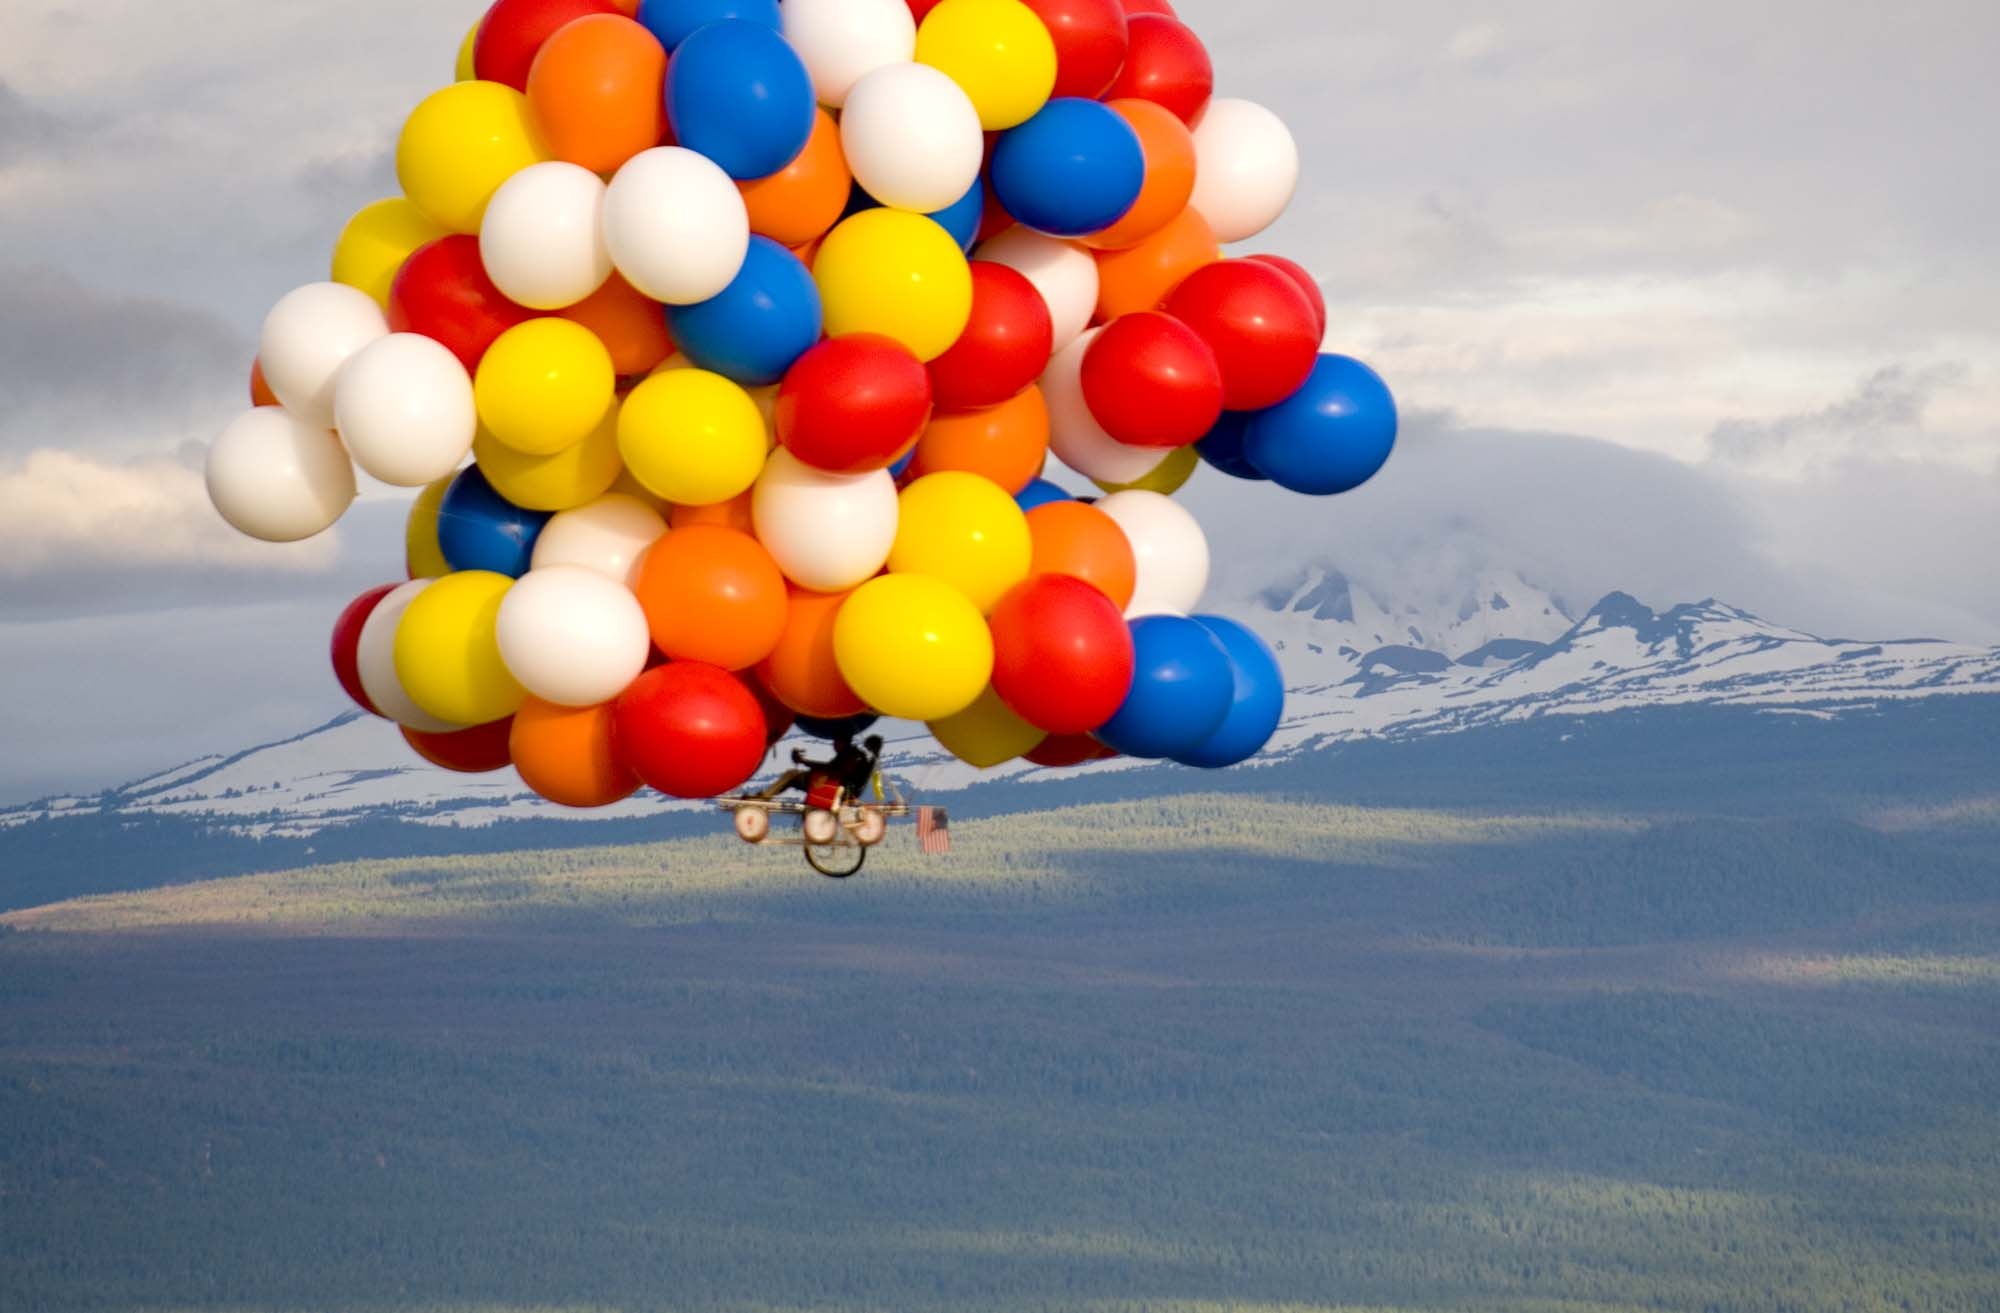 Cluster Ballooning: High altitude flight using a cluster of balloons, Extreme adventure sport. 2000x1320 HD Wallpaper.